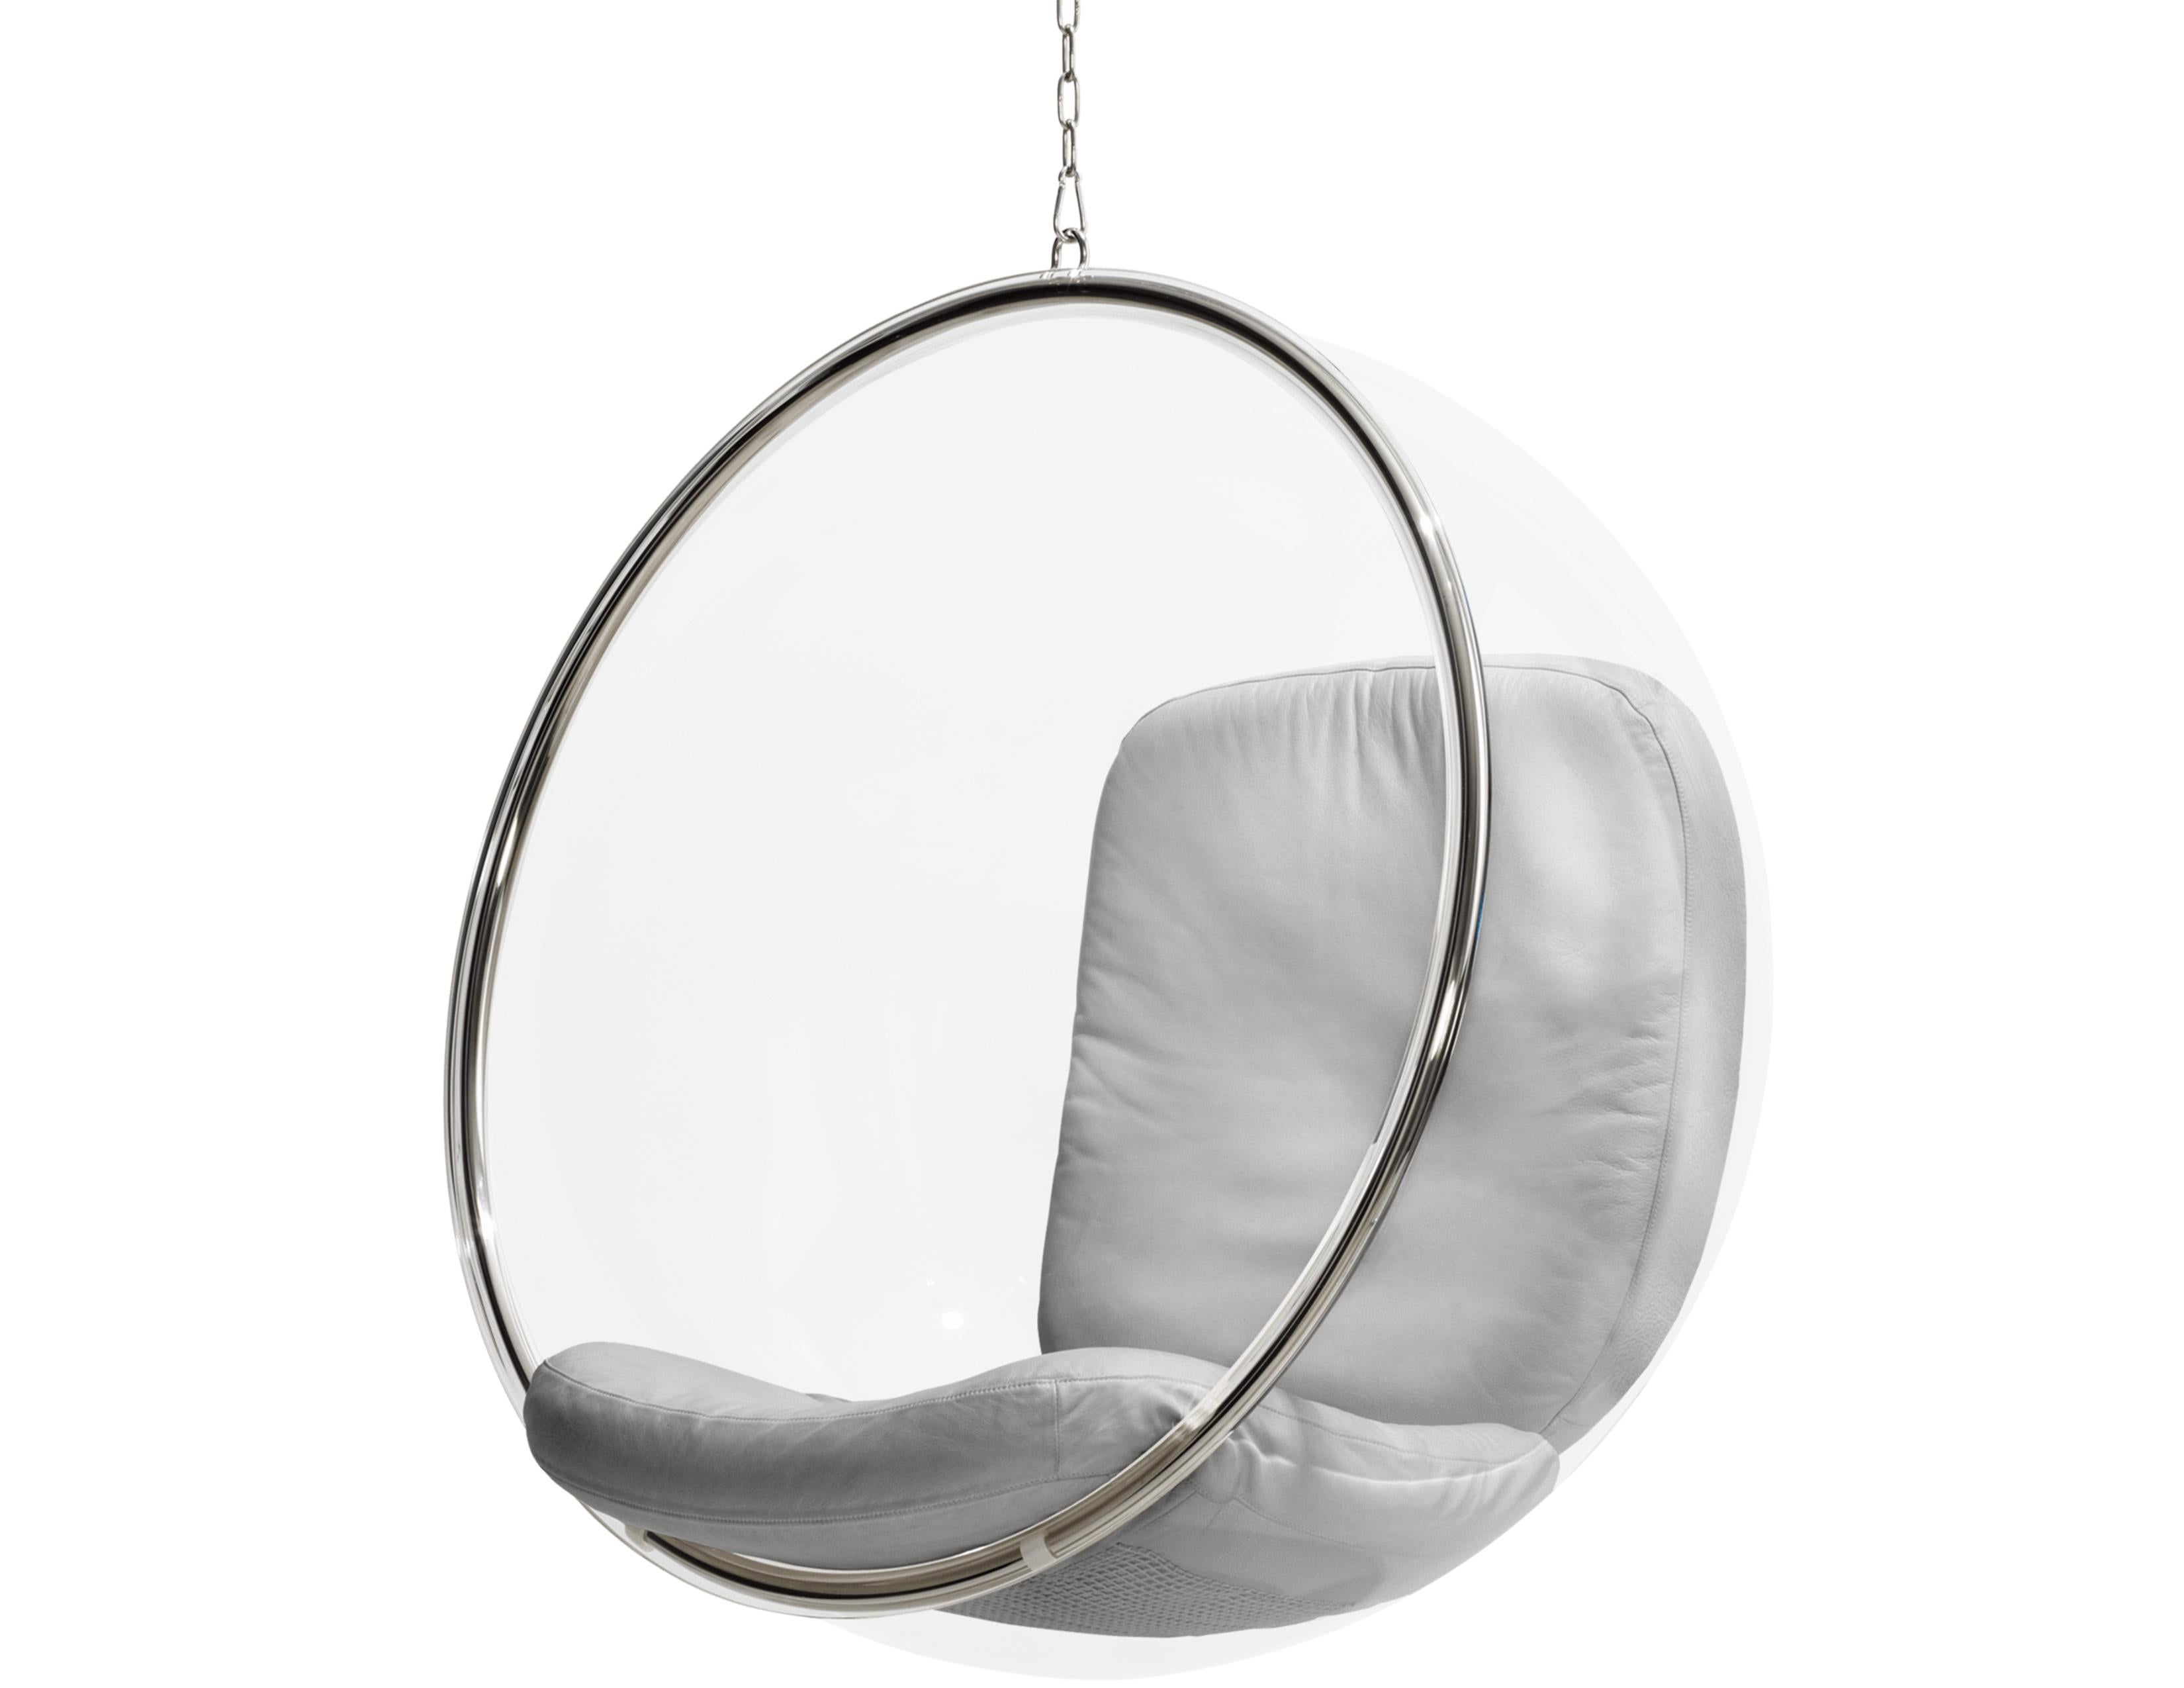 Finnish Iconic Eero Aarnio Silver Bubble Chair For Sale